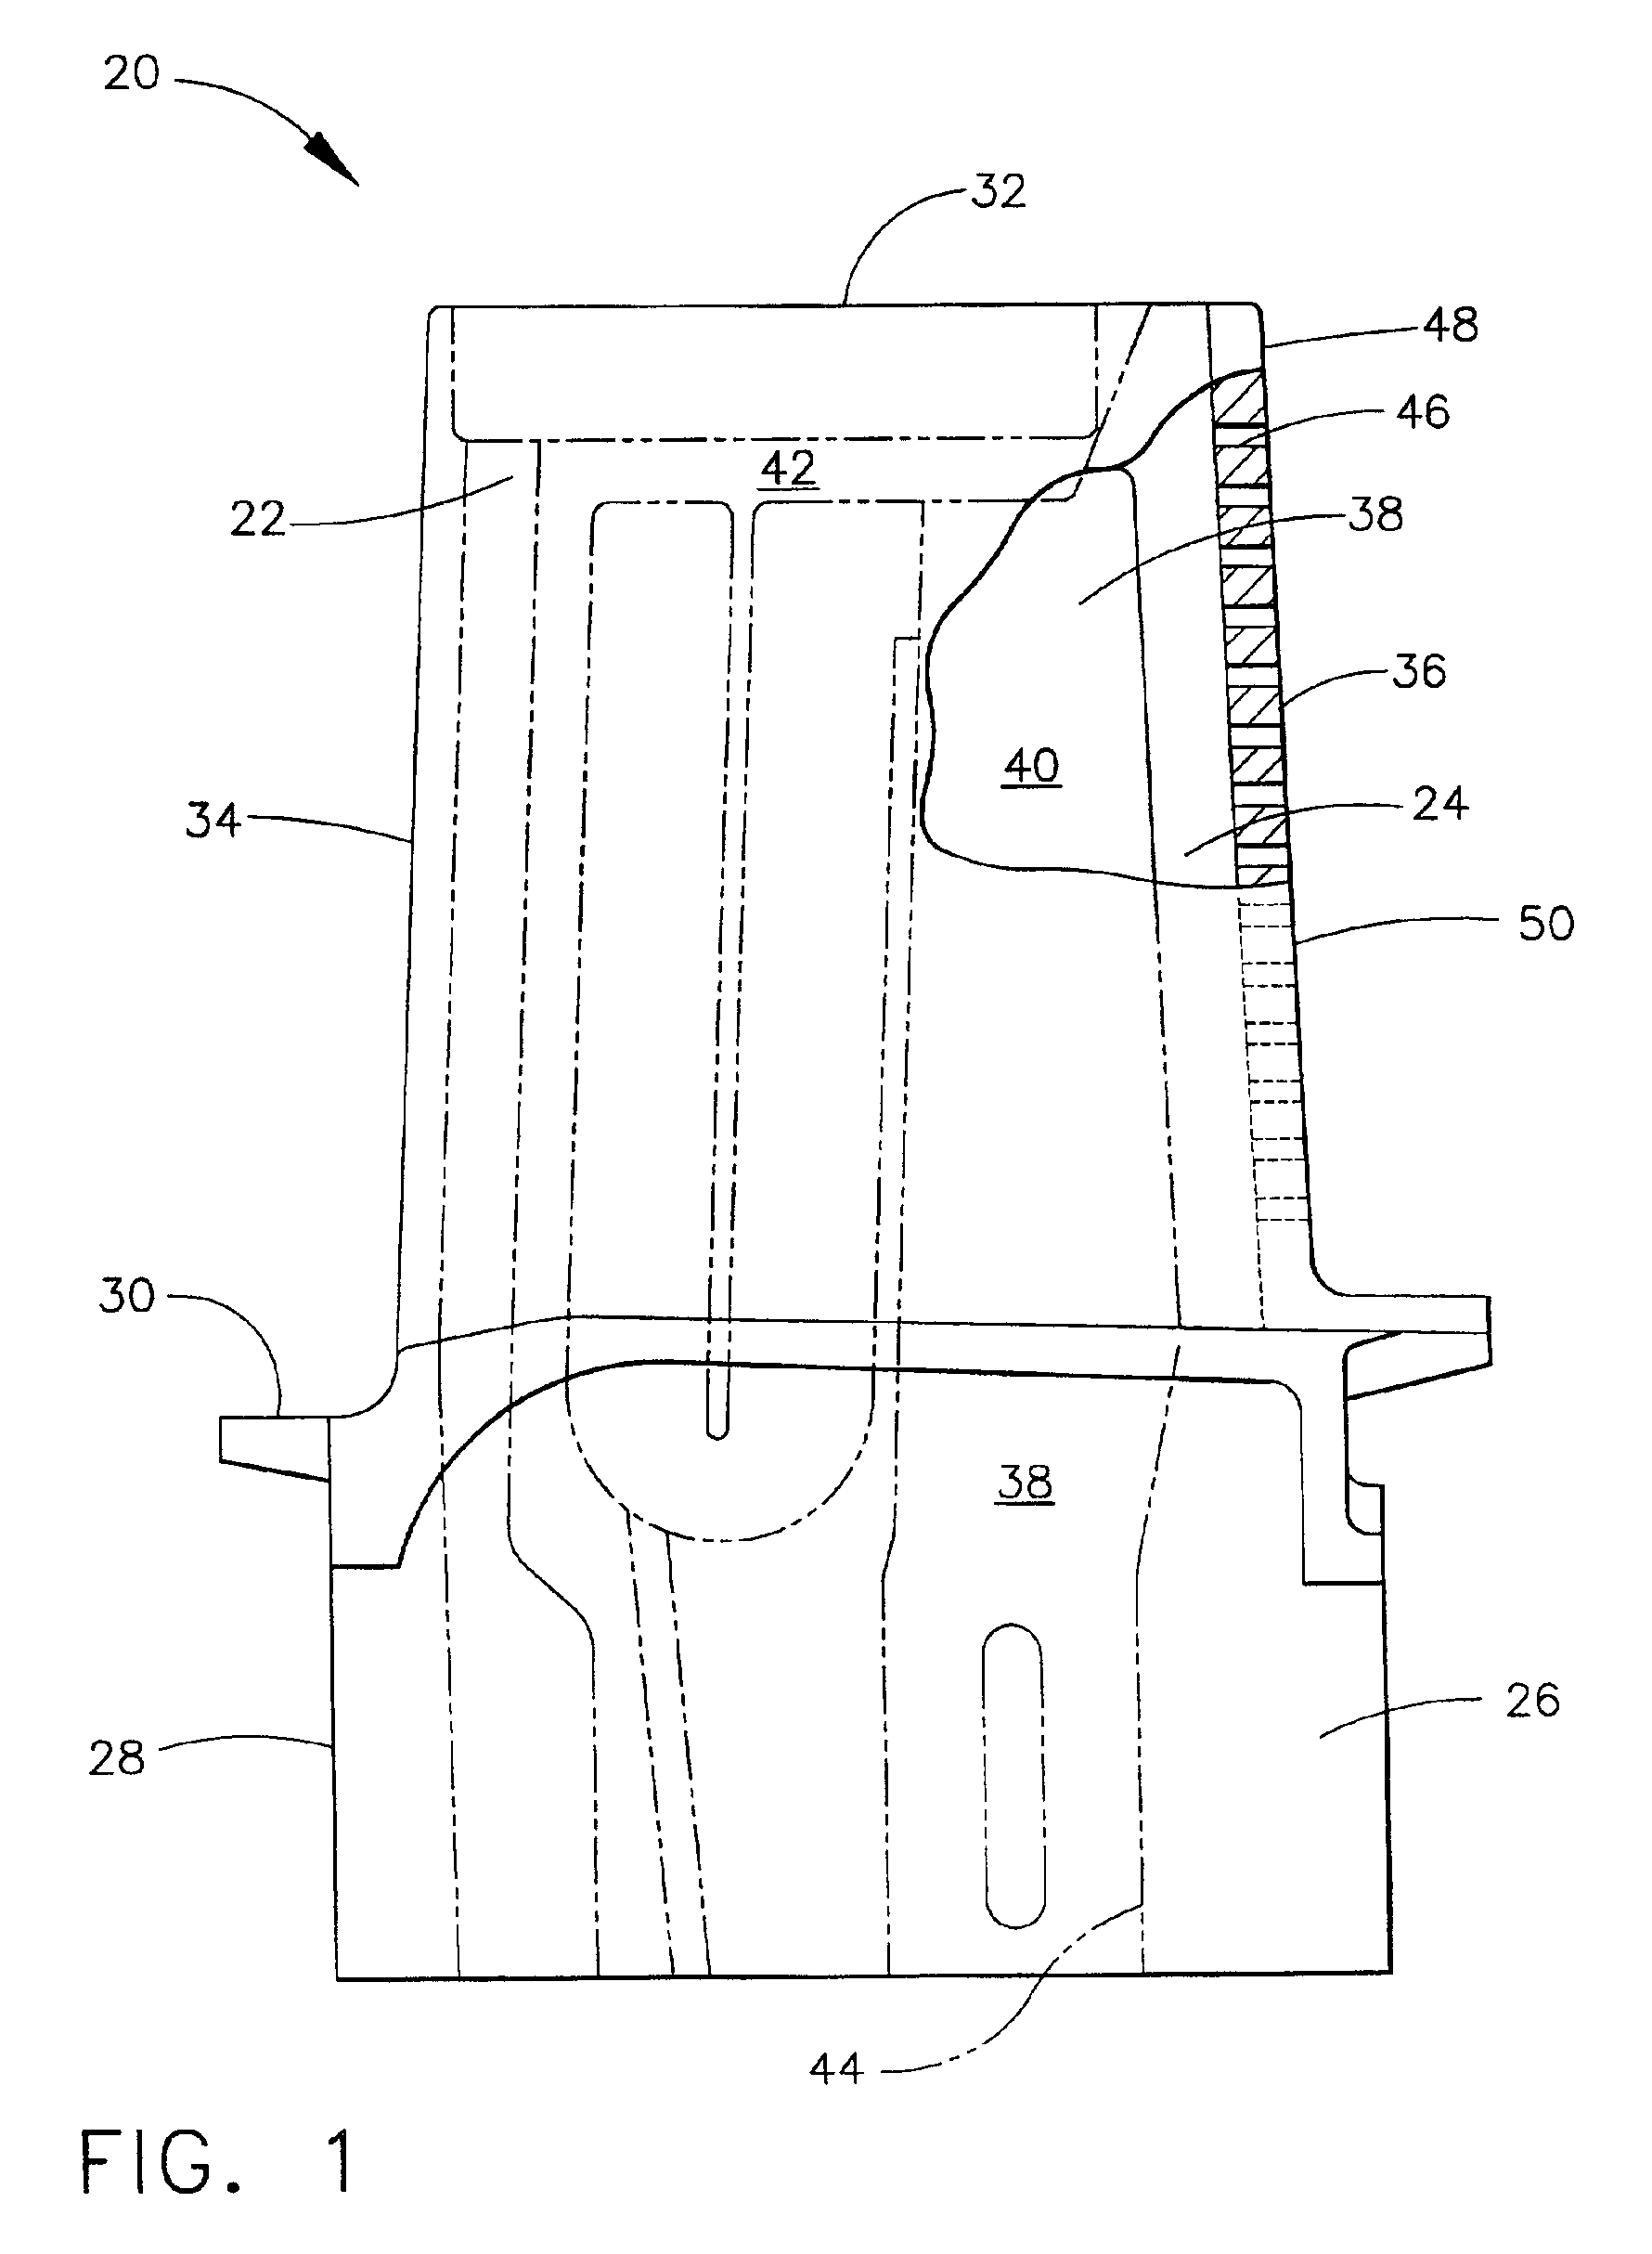 Dimensionally controlled pack aluminiding of internal surfaces of a hollow article